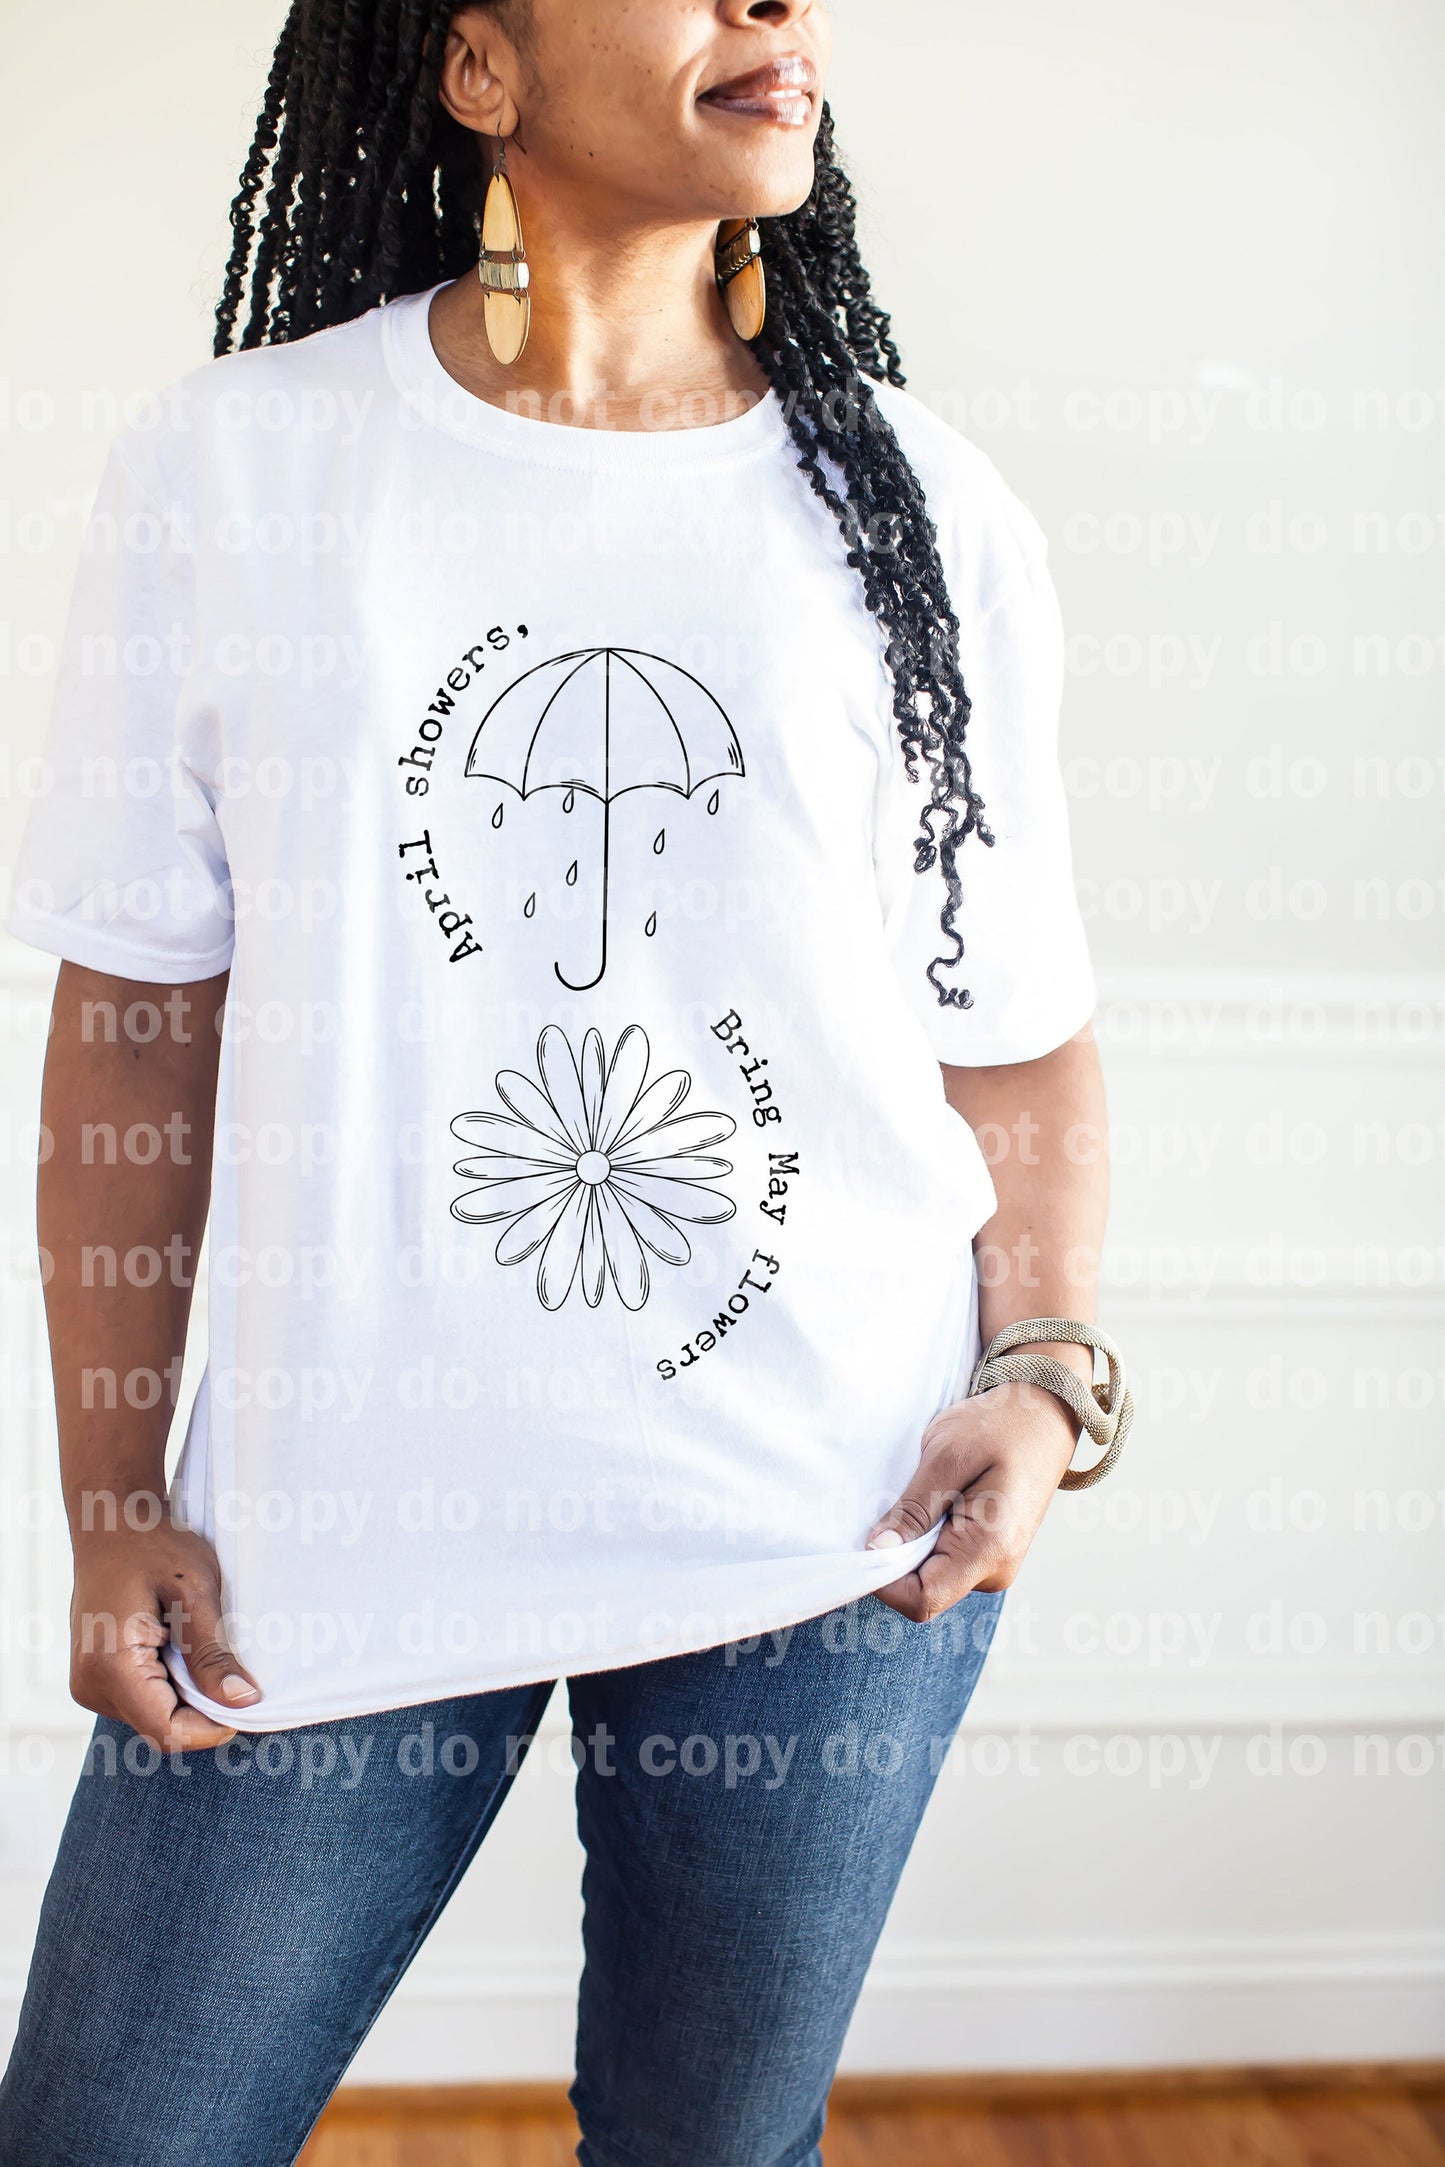 April Flowers Bring May Flowers Full Color/One Color Dream Print or Sublimation Print